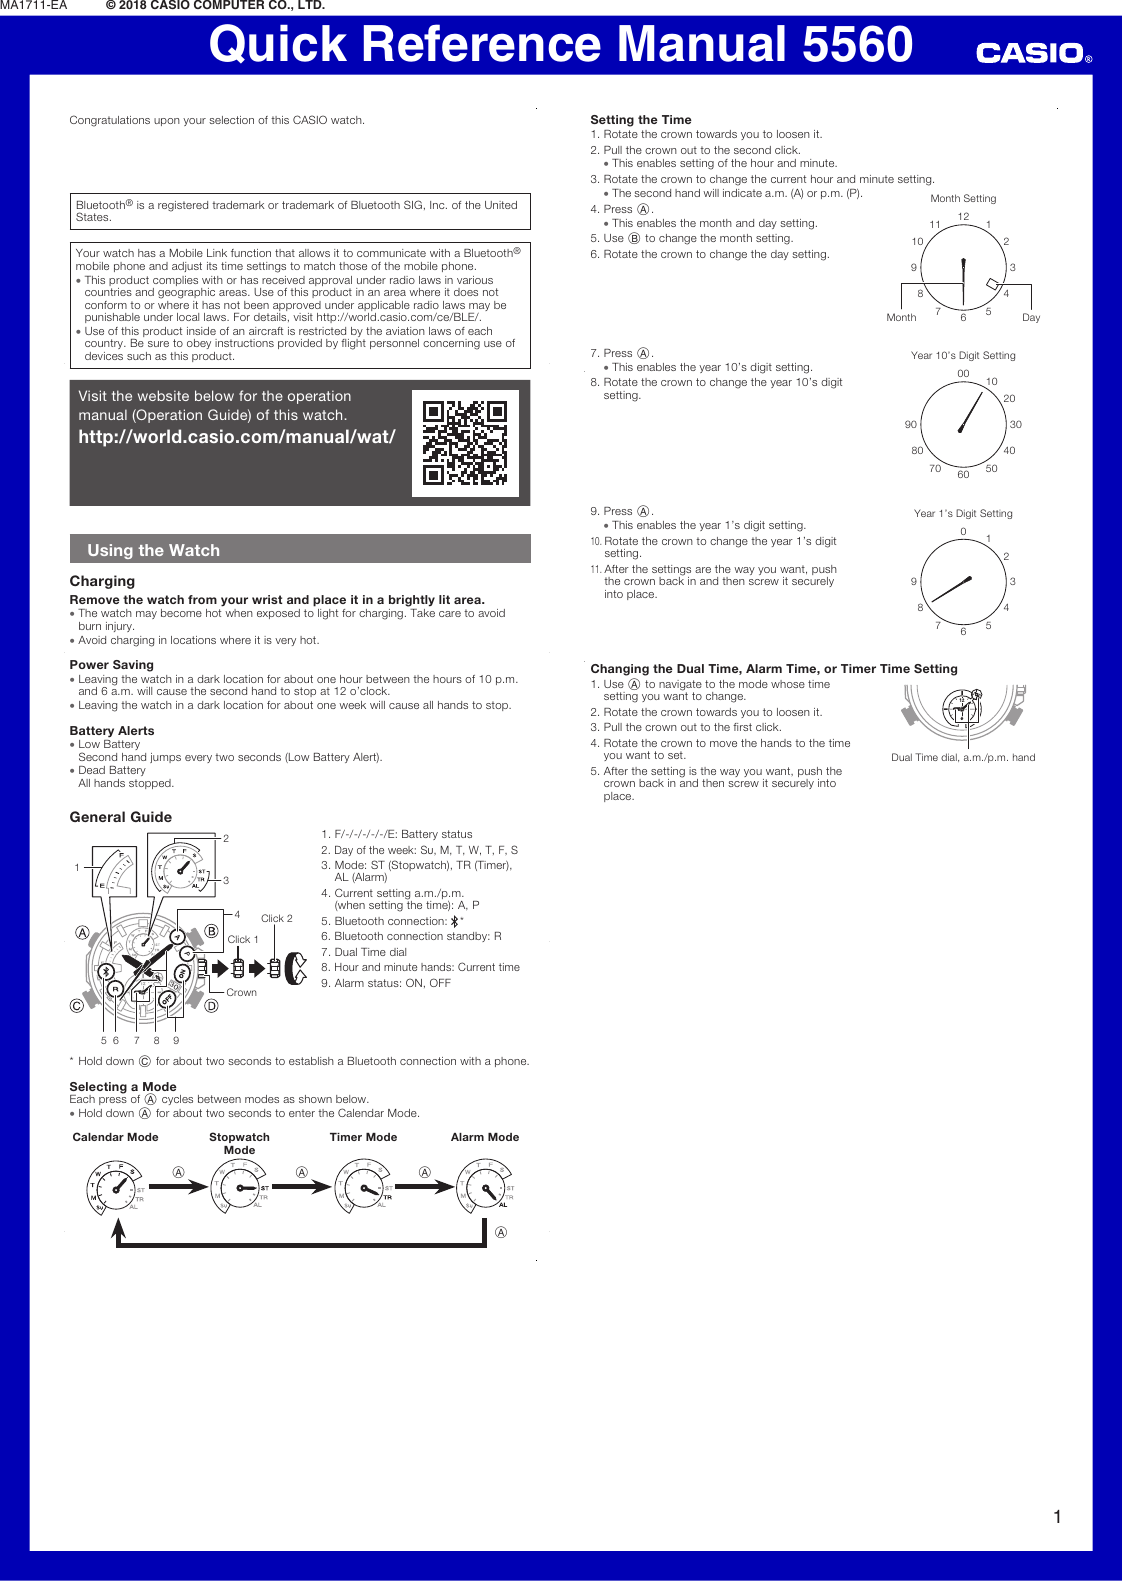 Page 1 of 2 - QW-5560 5560 - Quick Reference Manual Pm5560 En